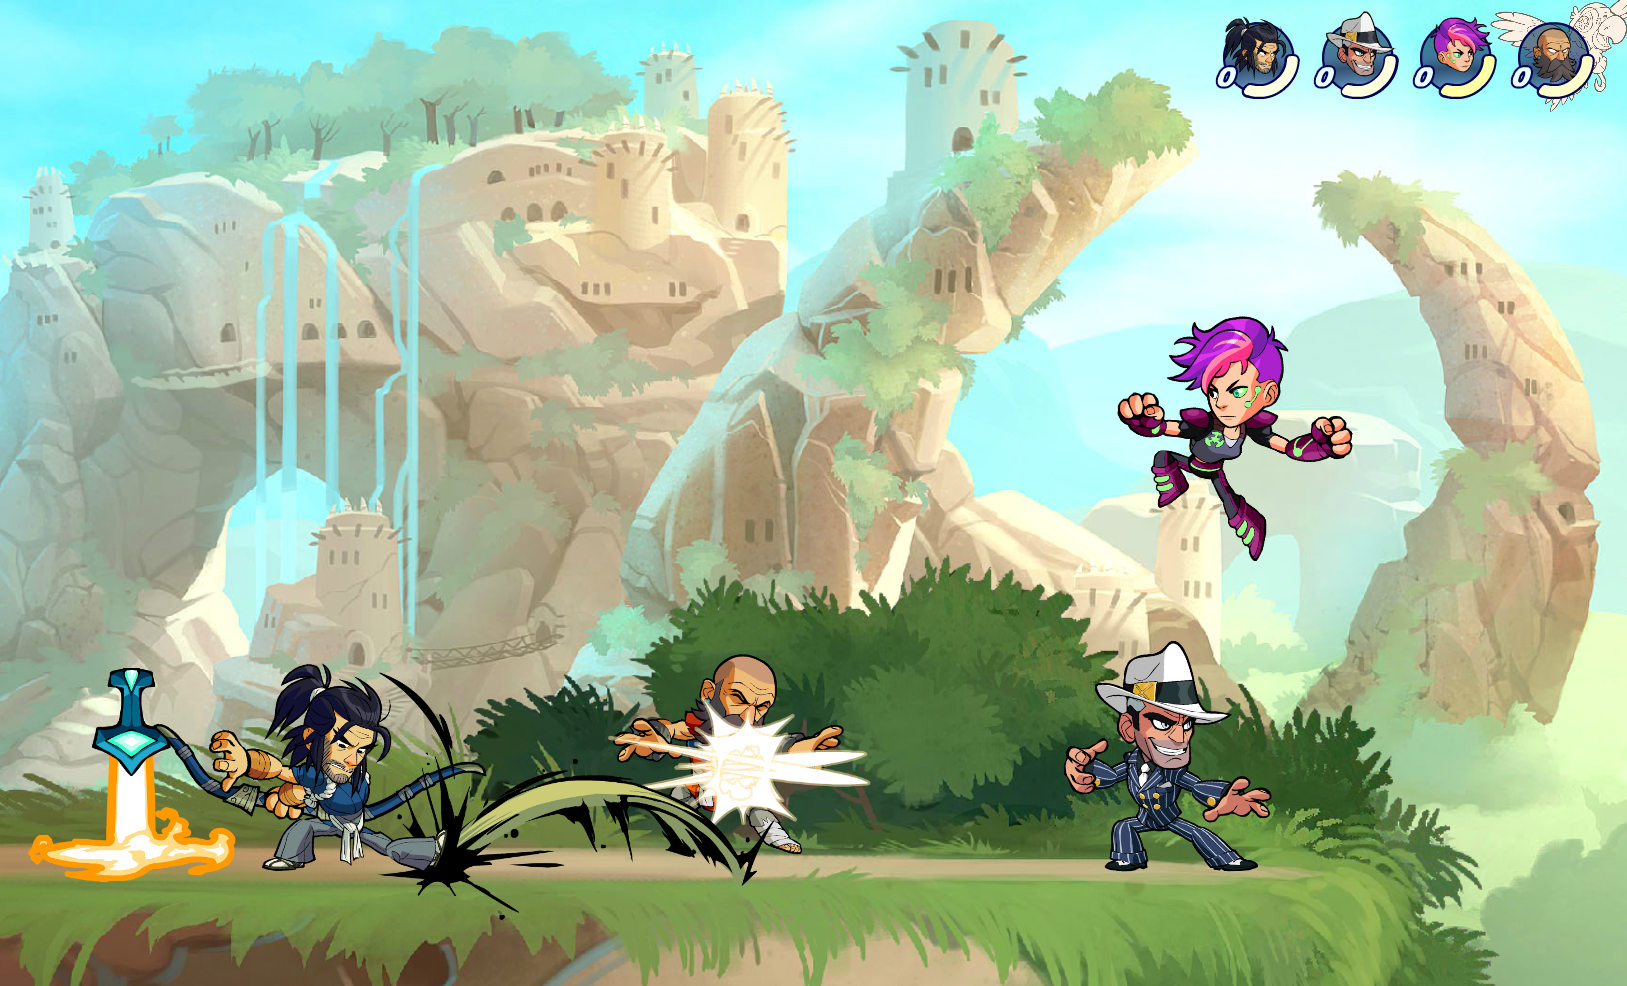 Game: Brawlhalla Review